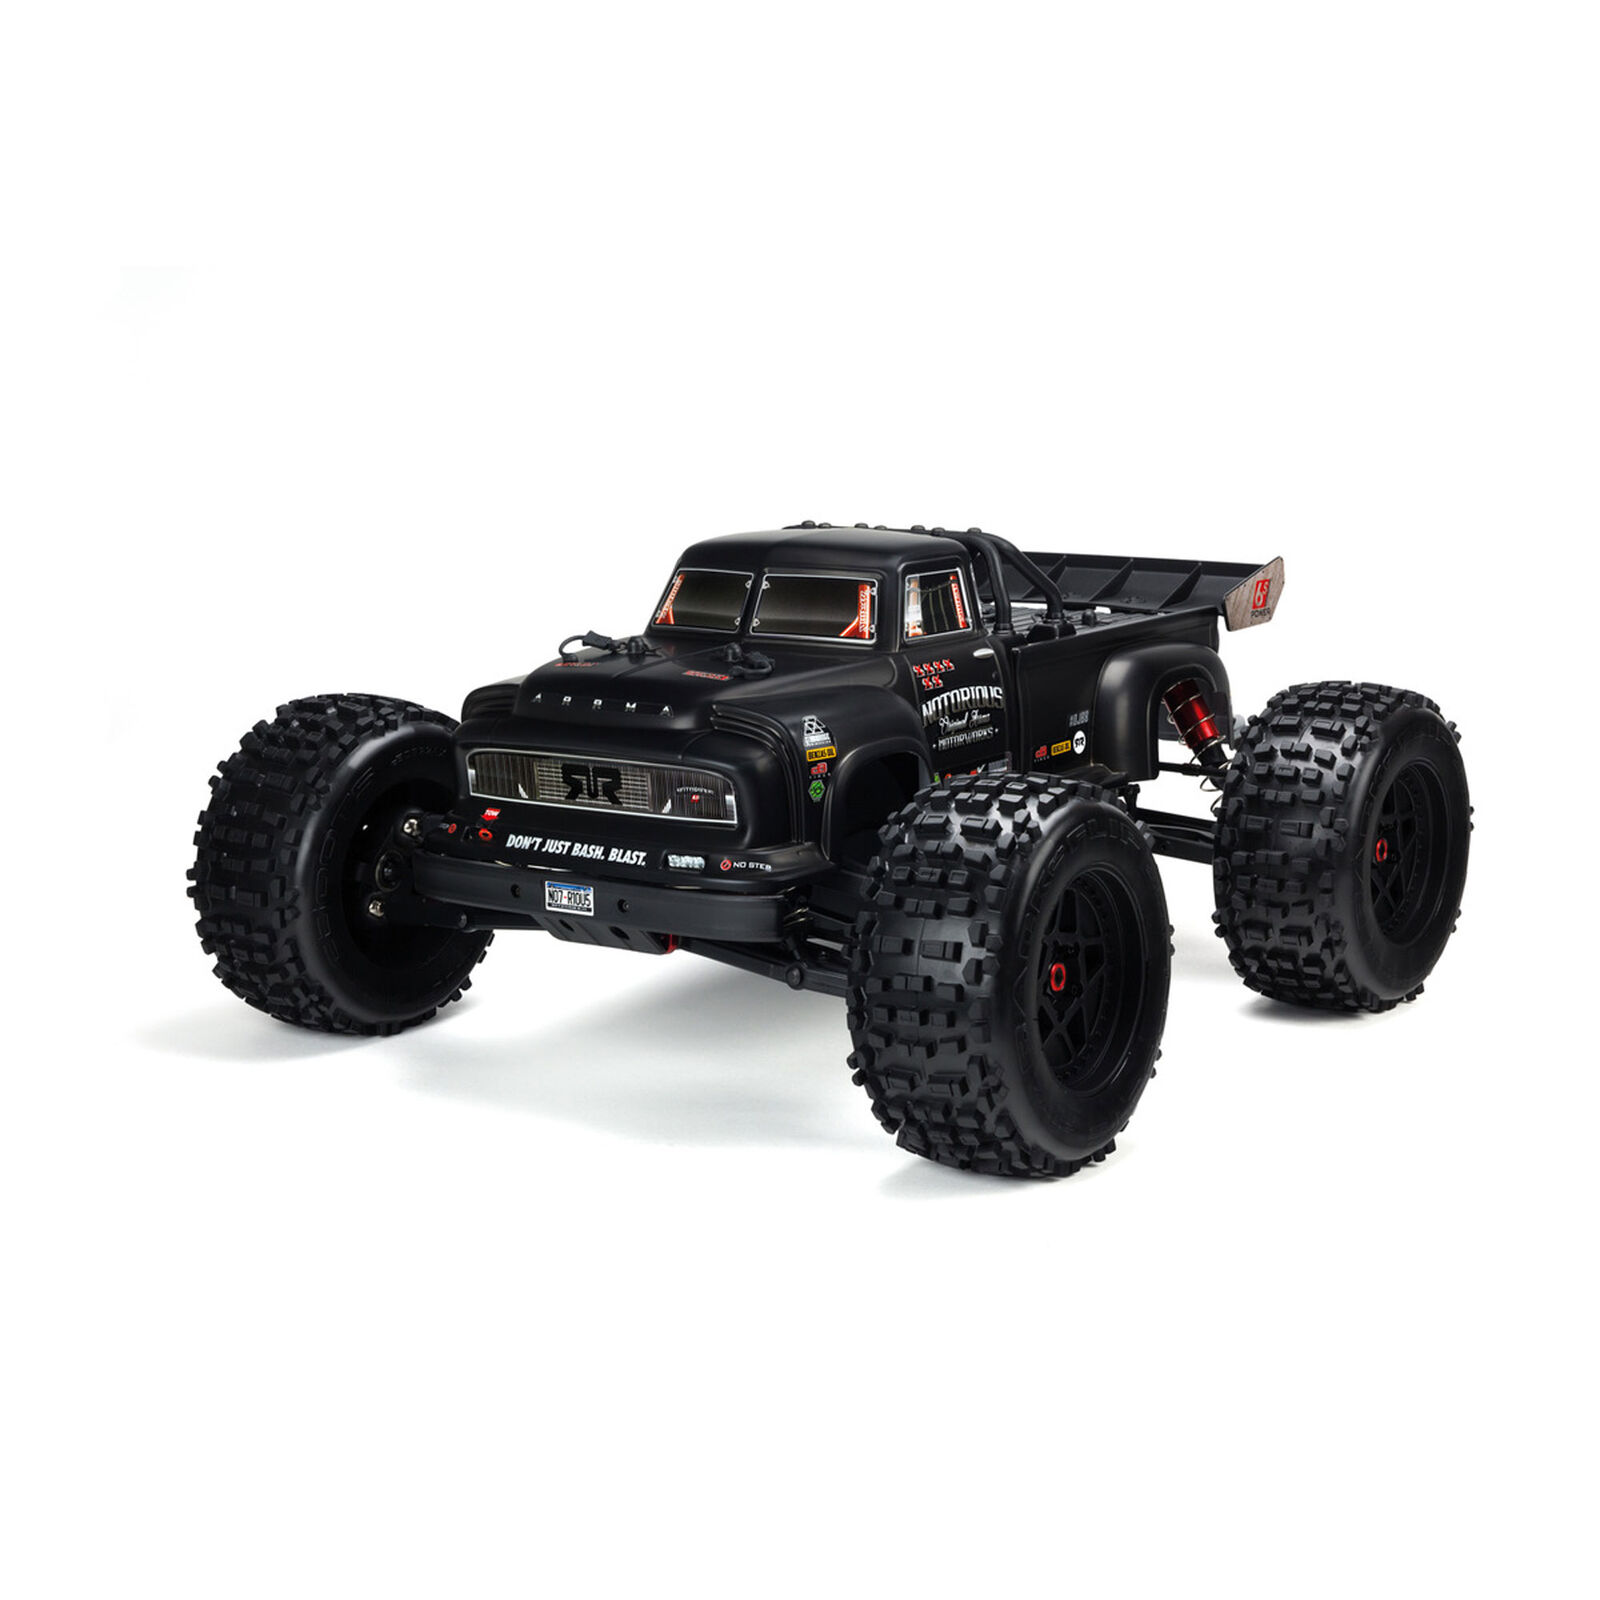 1/8 Painted Body, Black Real Steel: NOTORIOUS 6S BLX